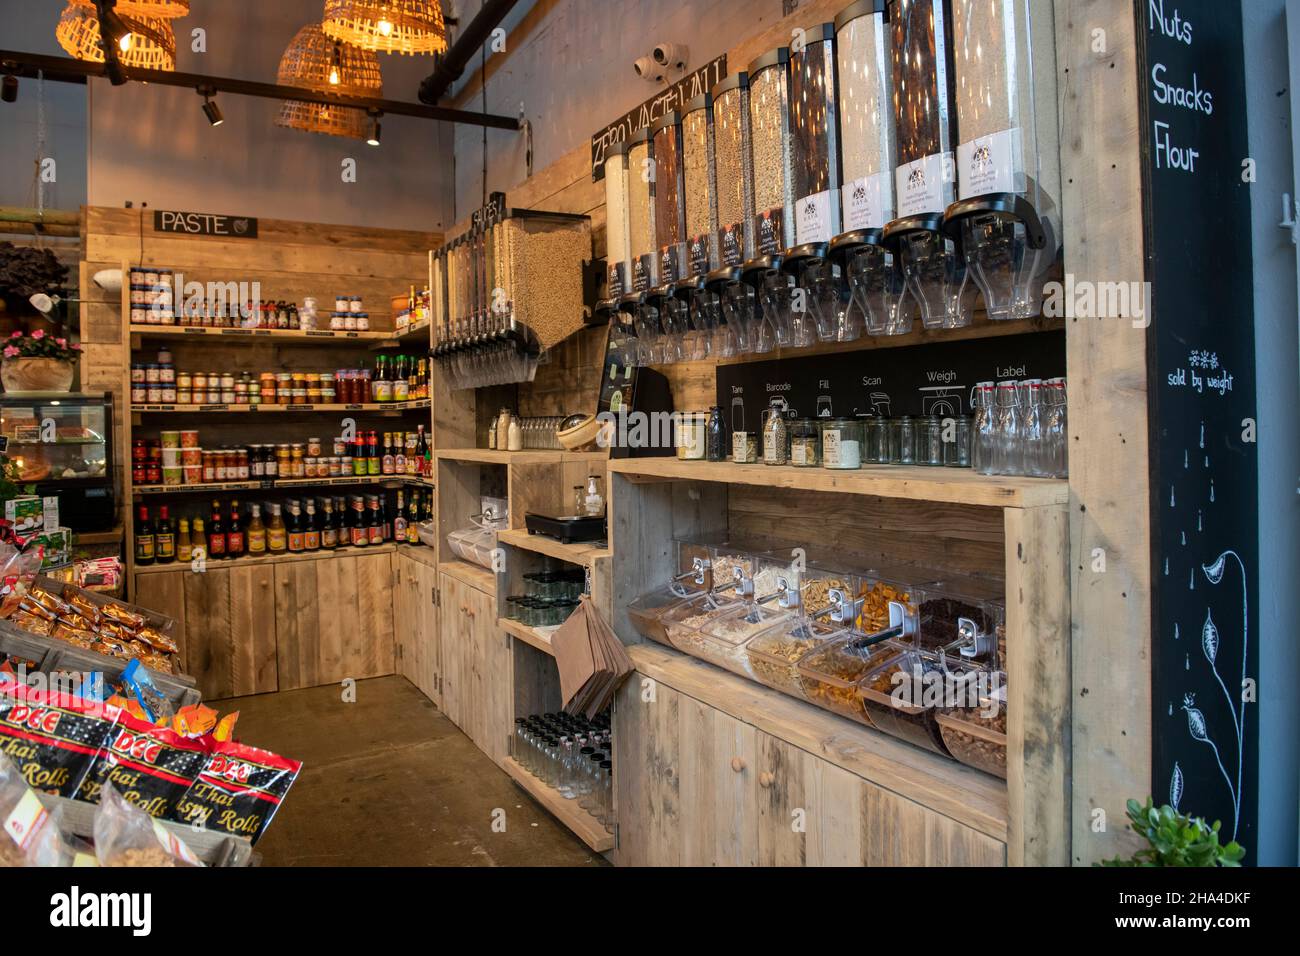 A specialist South East Asian sustainable grocery shop in Borough Market Stock Photo